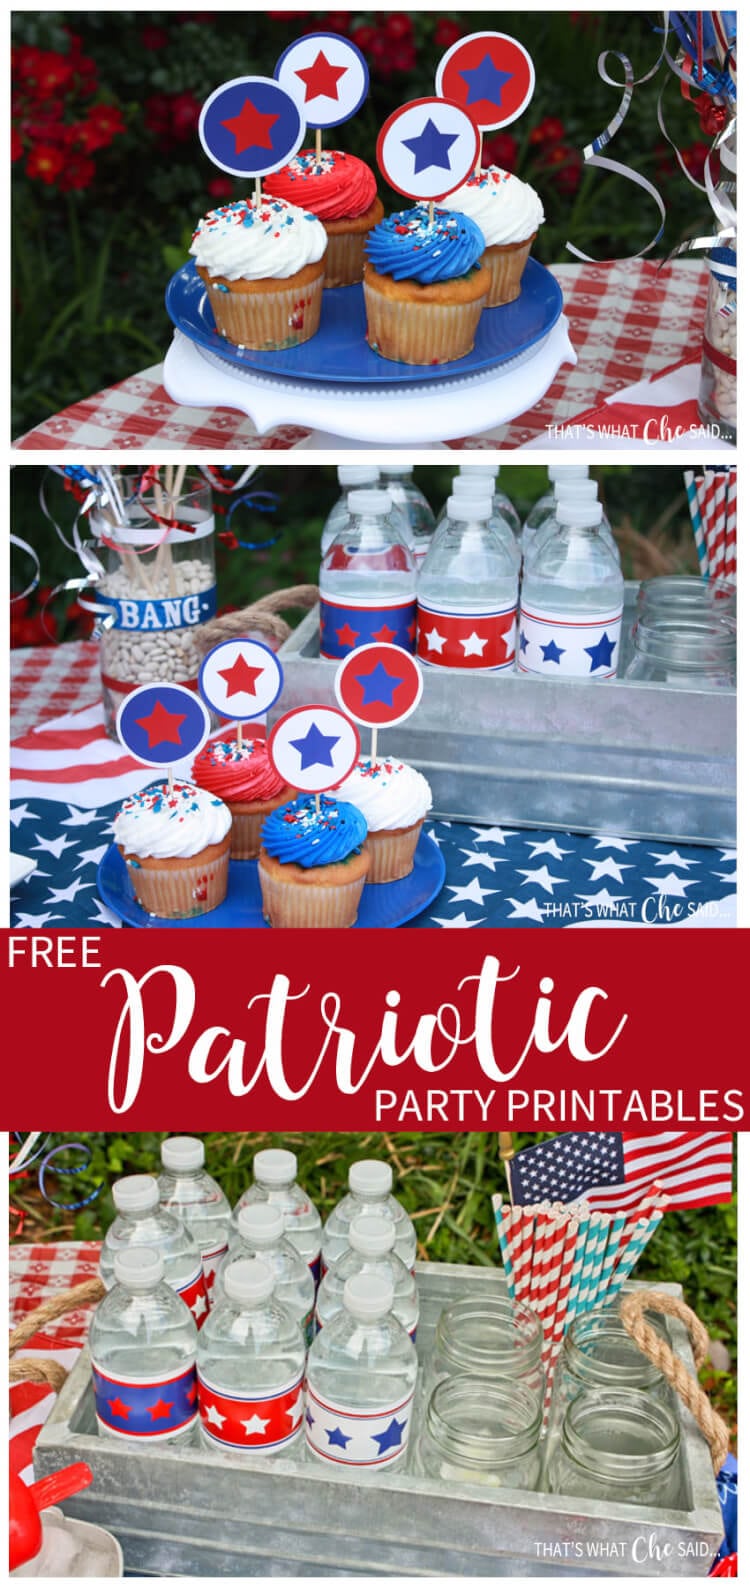 Free Patriotic Party Printables -- Perfect for Memorial Day, 4th of July and Labor Day festivities!